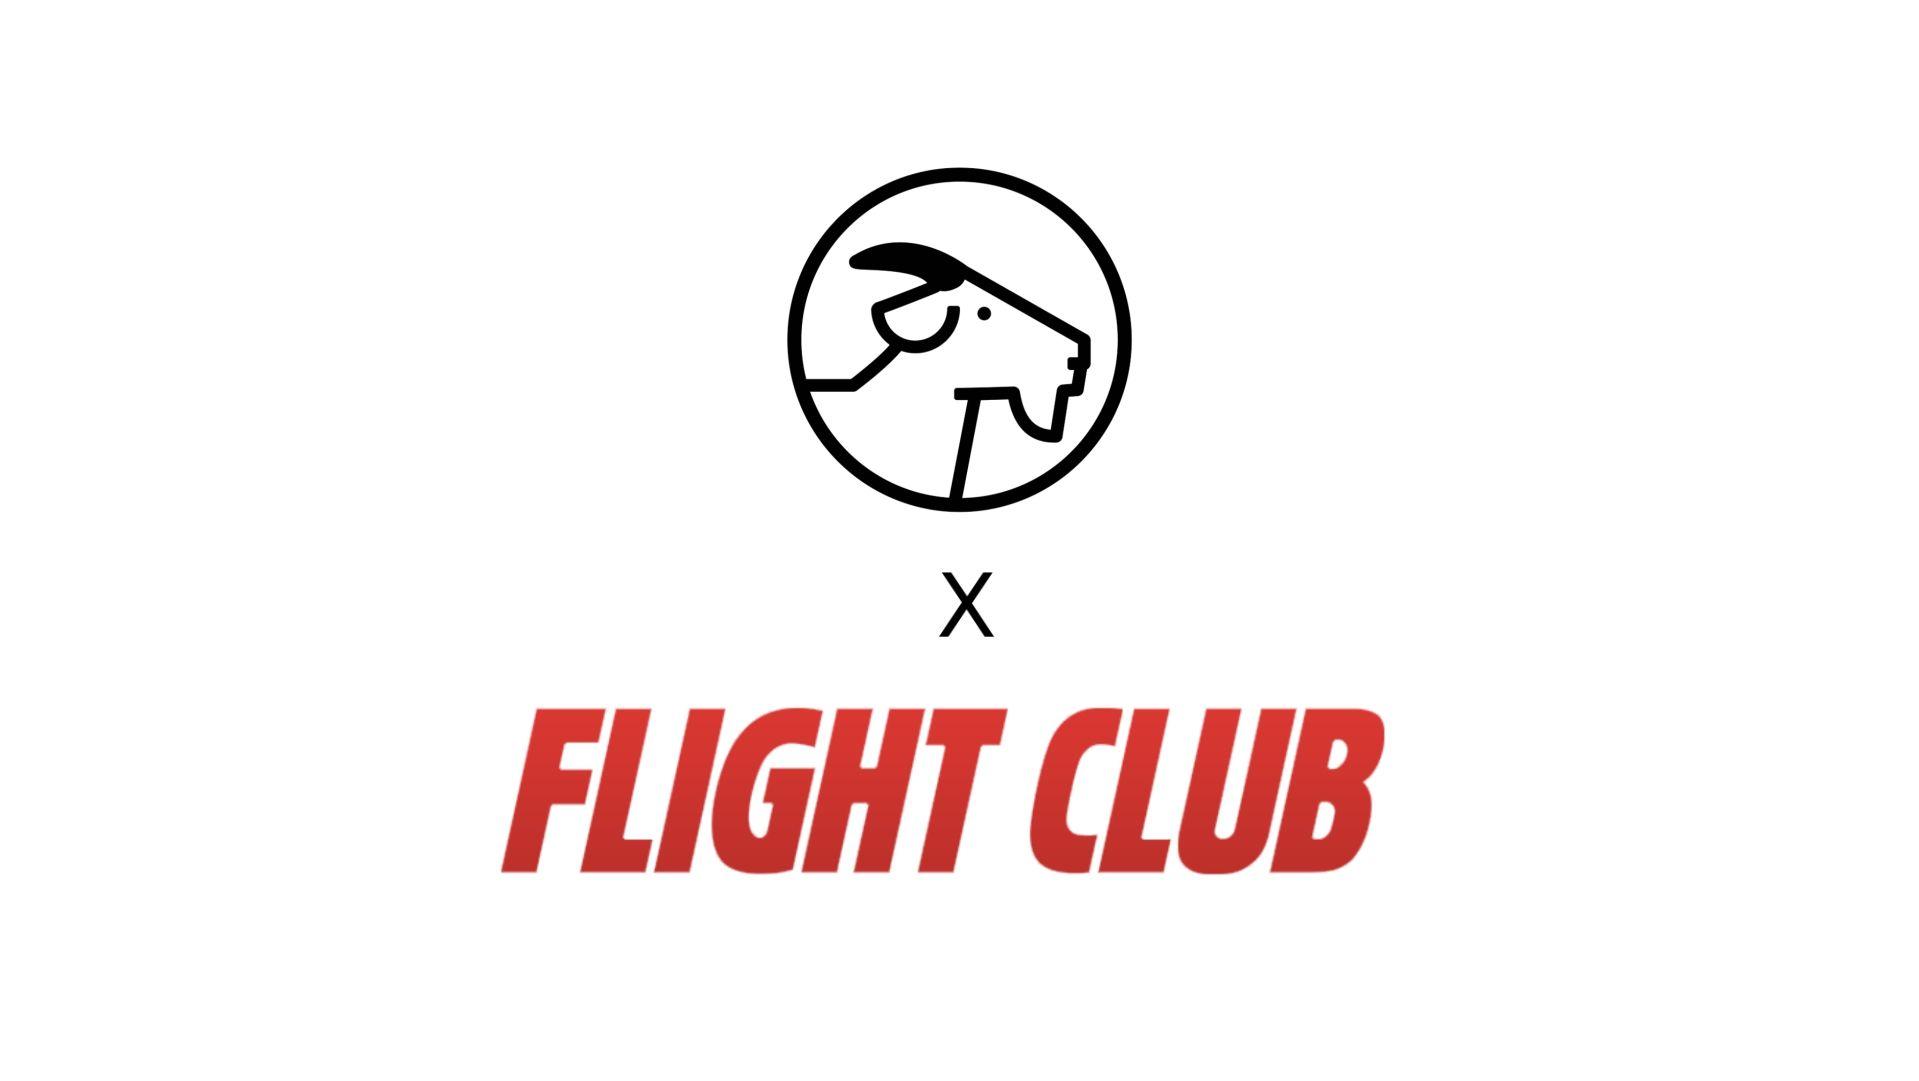 Flight Club Logo - GOAT and Flight Club Team Up in a Surprising New Merger